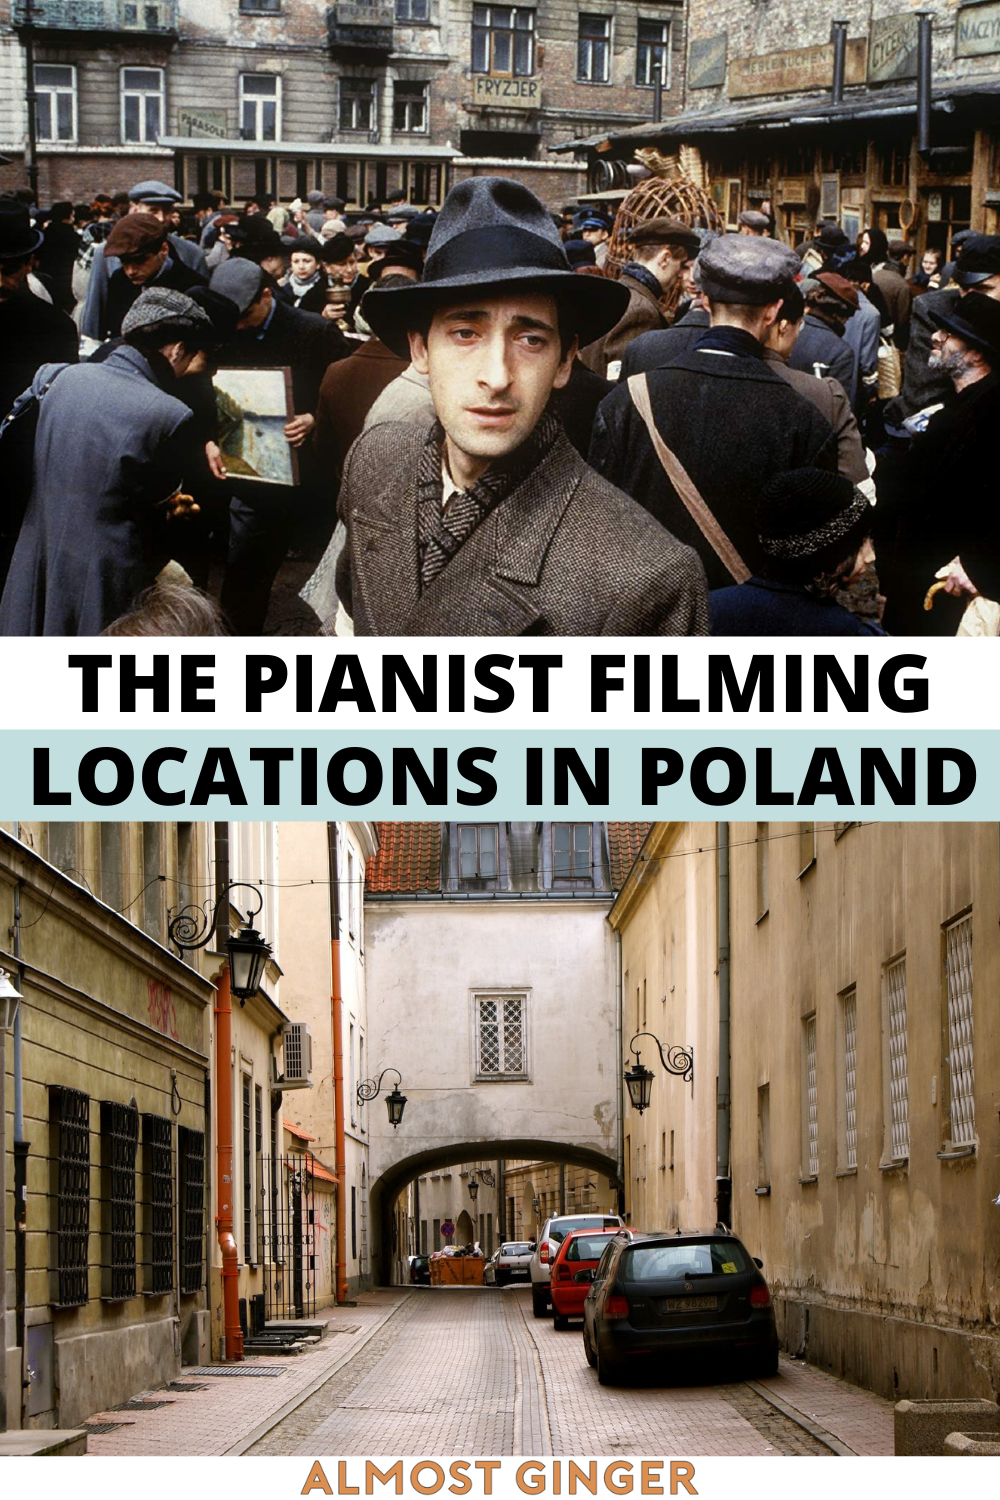 Where Was The Pianist Filmed? The Pianist Filming Locations in Poland | almostginger.com